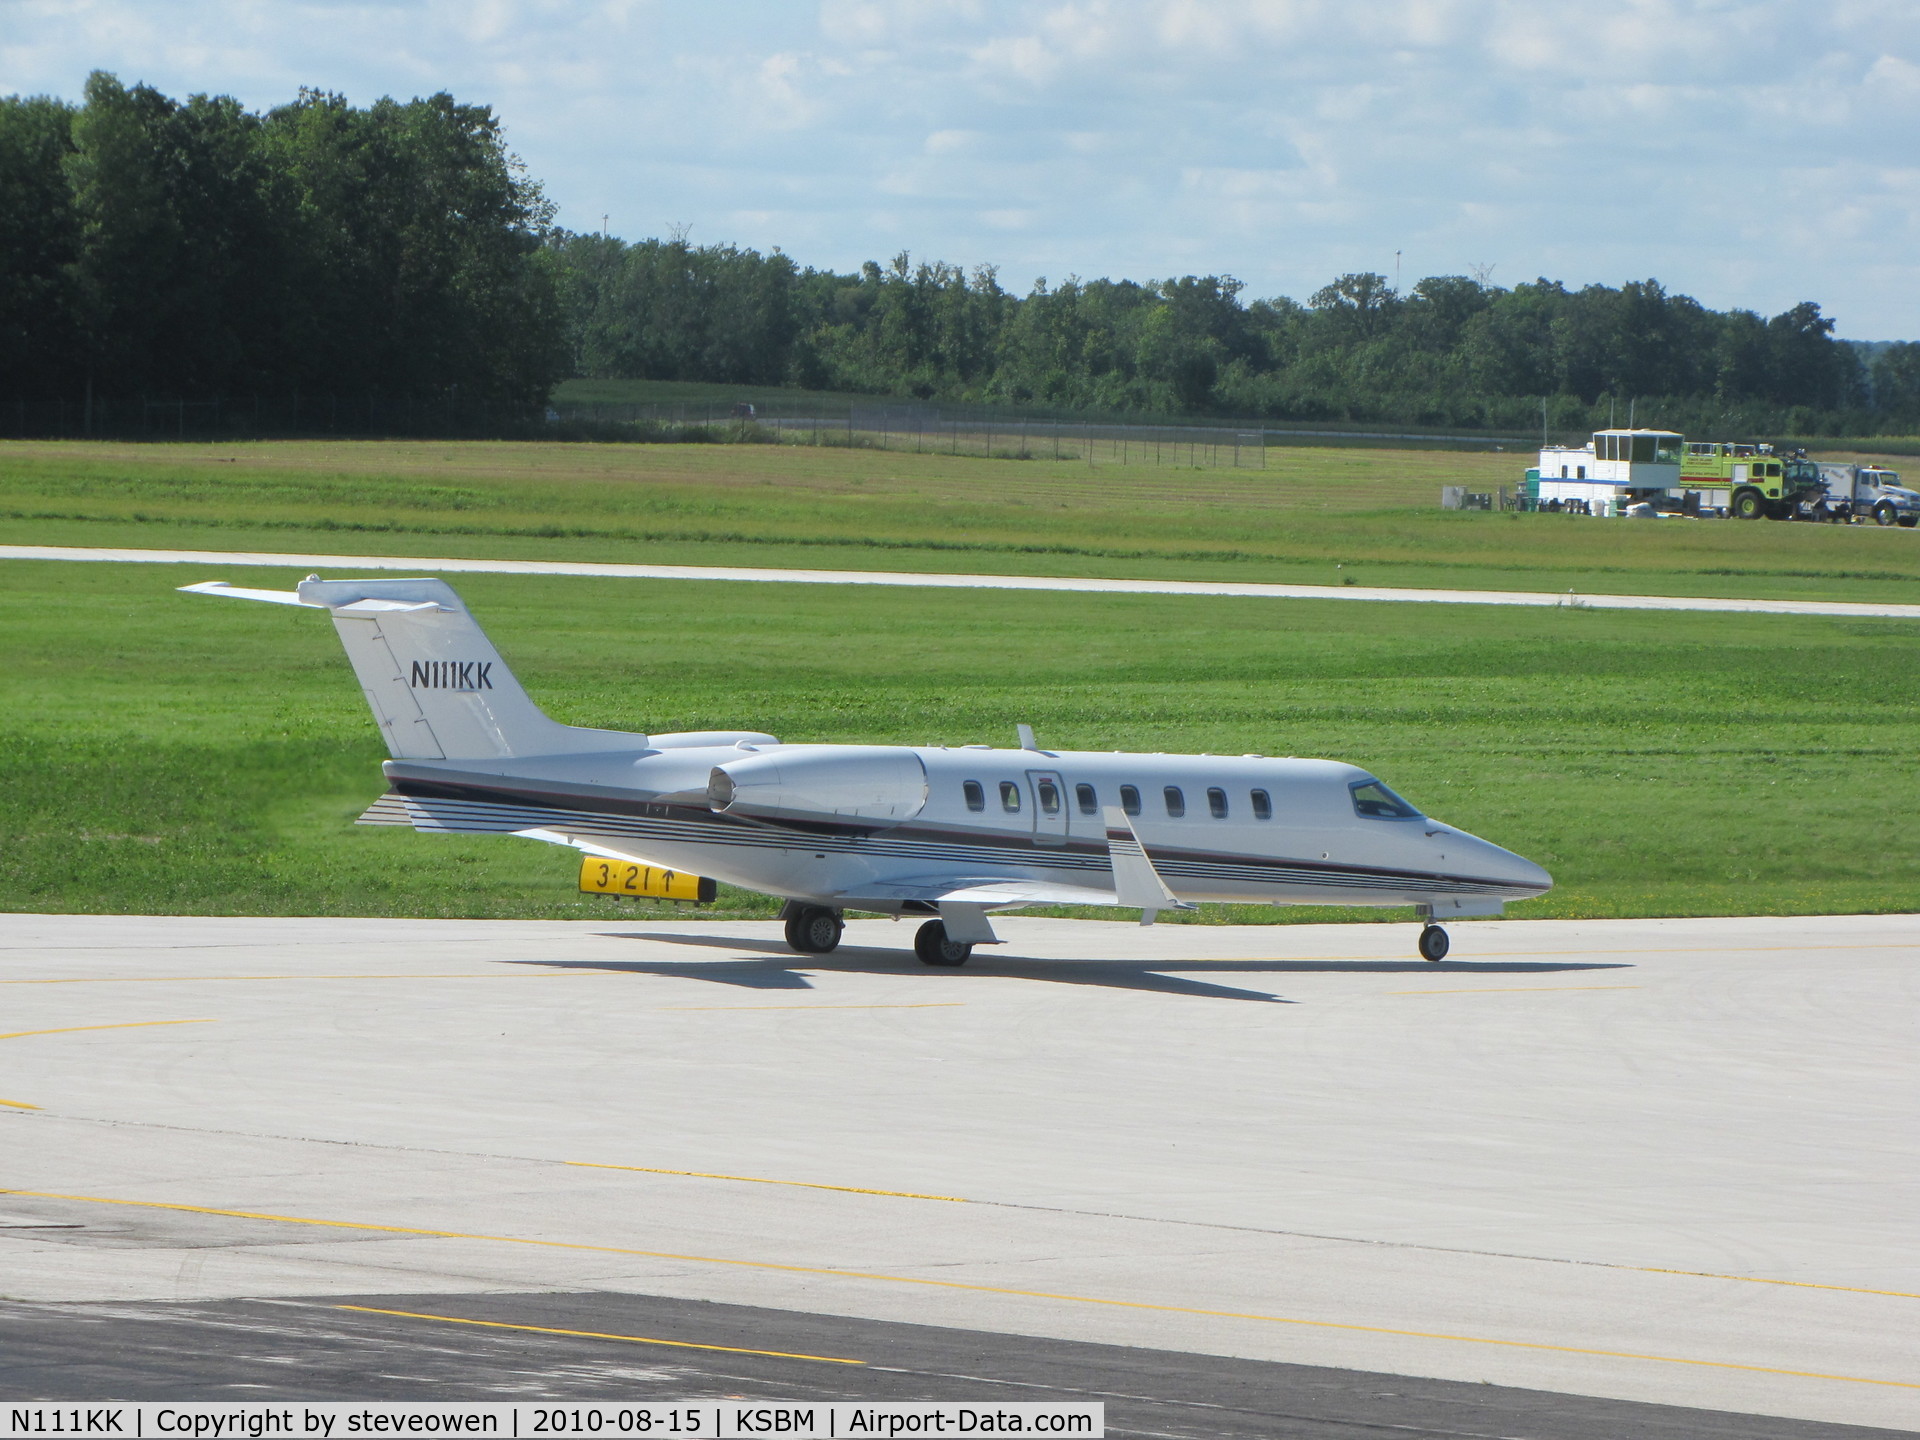 N111KK, 1999 Learjet 45 C/N 061, taxing out @KSBM during the PGA tour